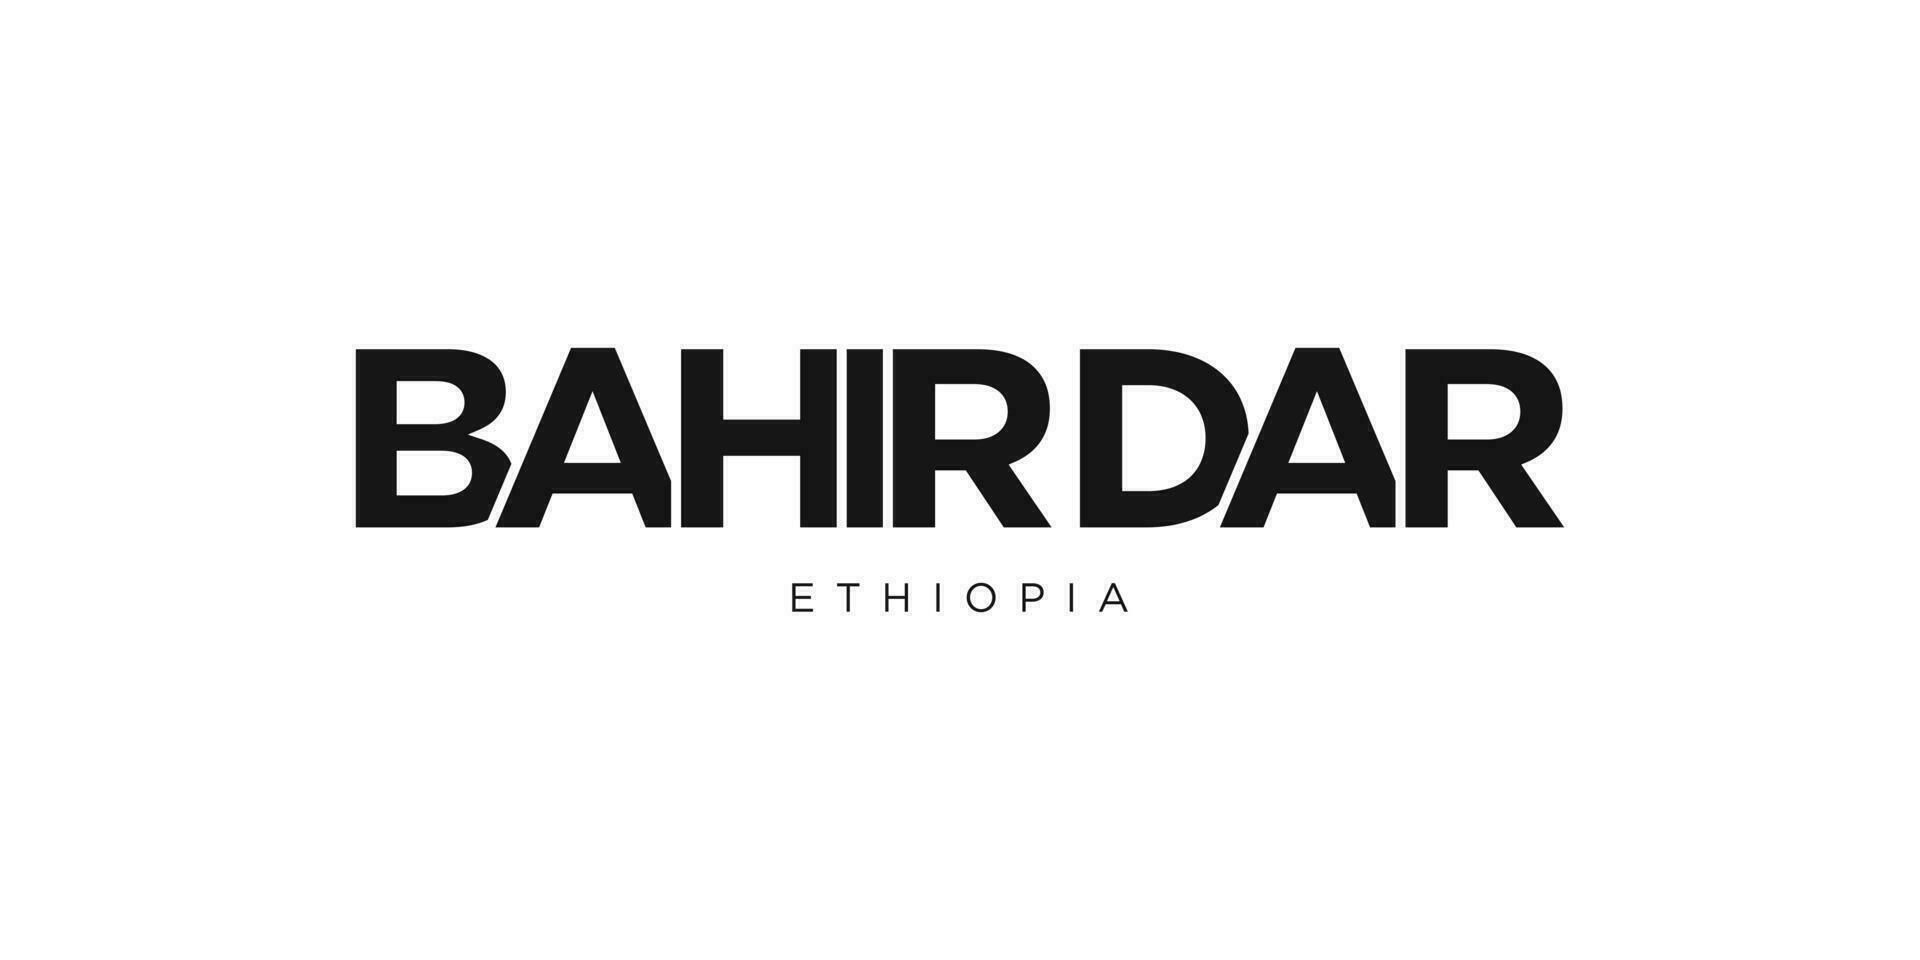 Bahir Dar in the Ethiopia emblem. The design features a geometric style, vector illustration with bold typography in a modern font. The graphic slogan lettering.